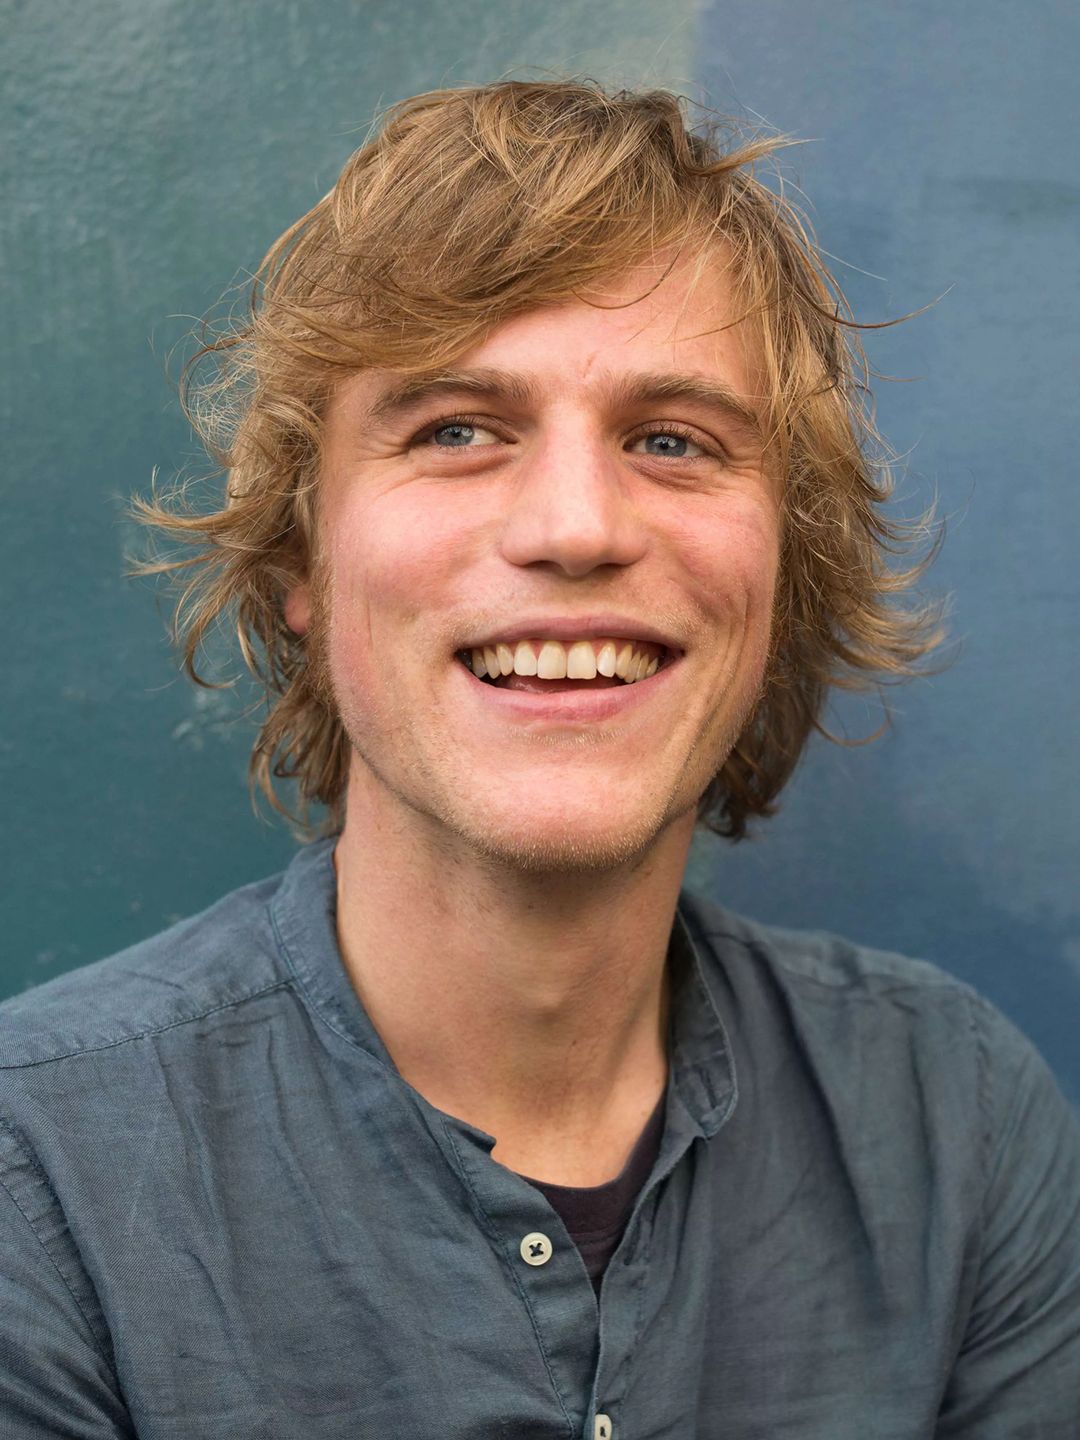 Johnny Flynn young age